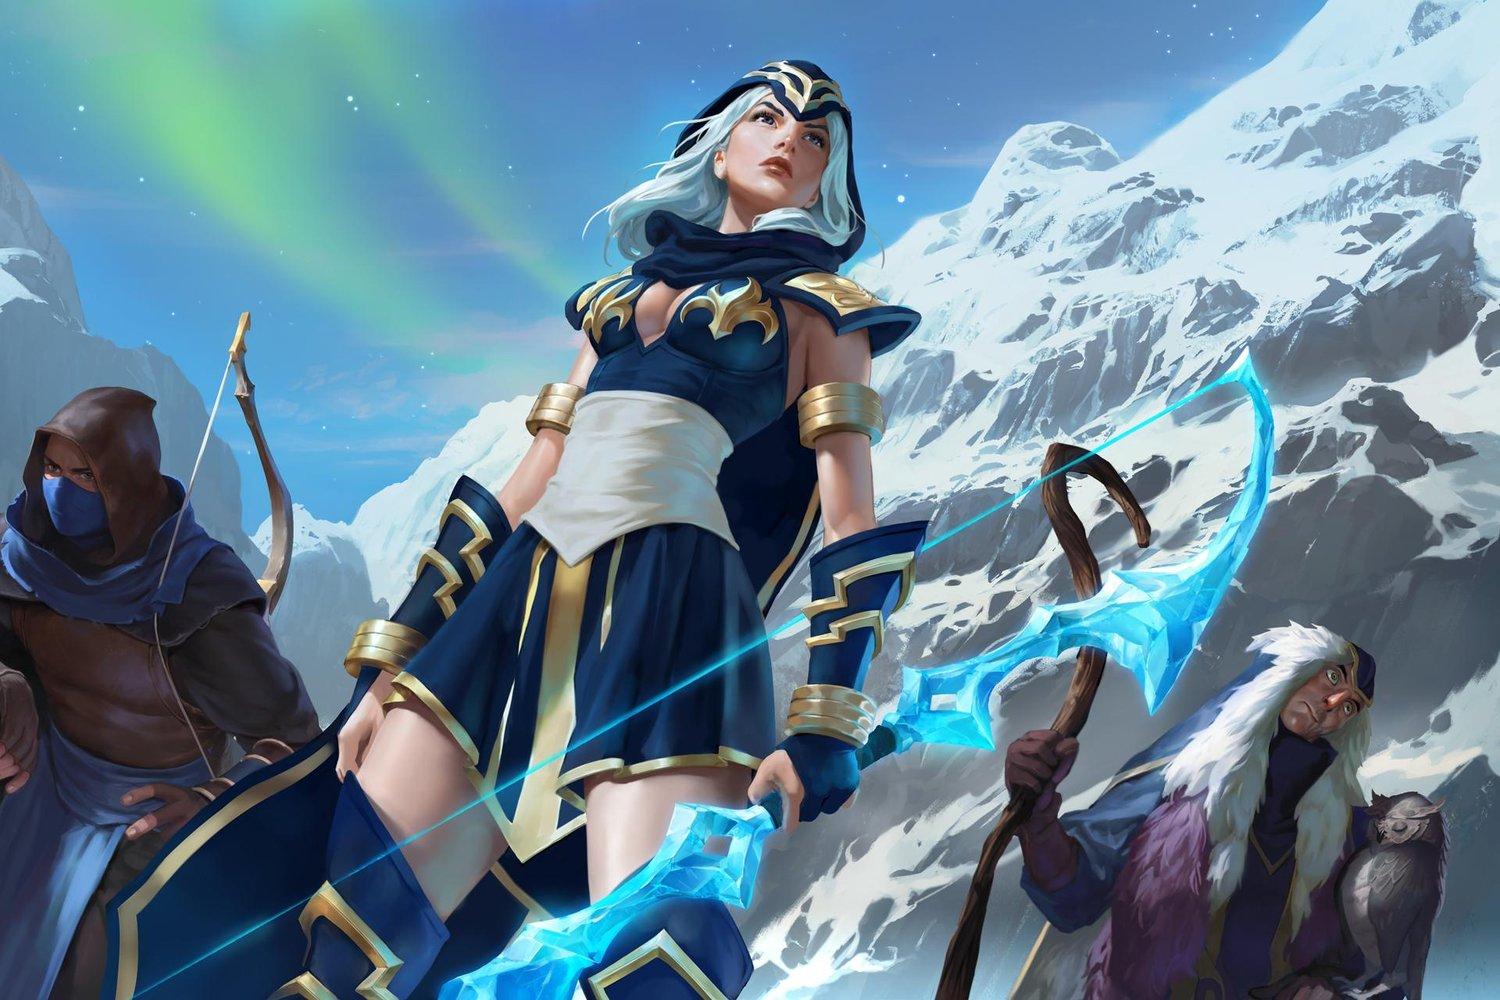 Legends of runeterra tips: 4 steps to master the game